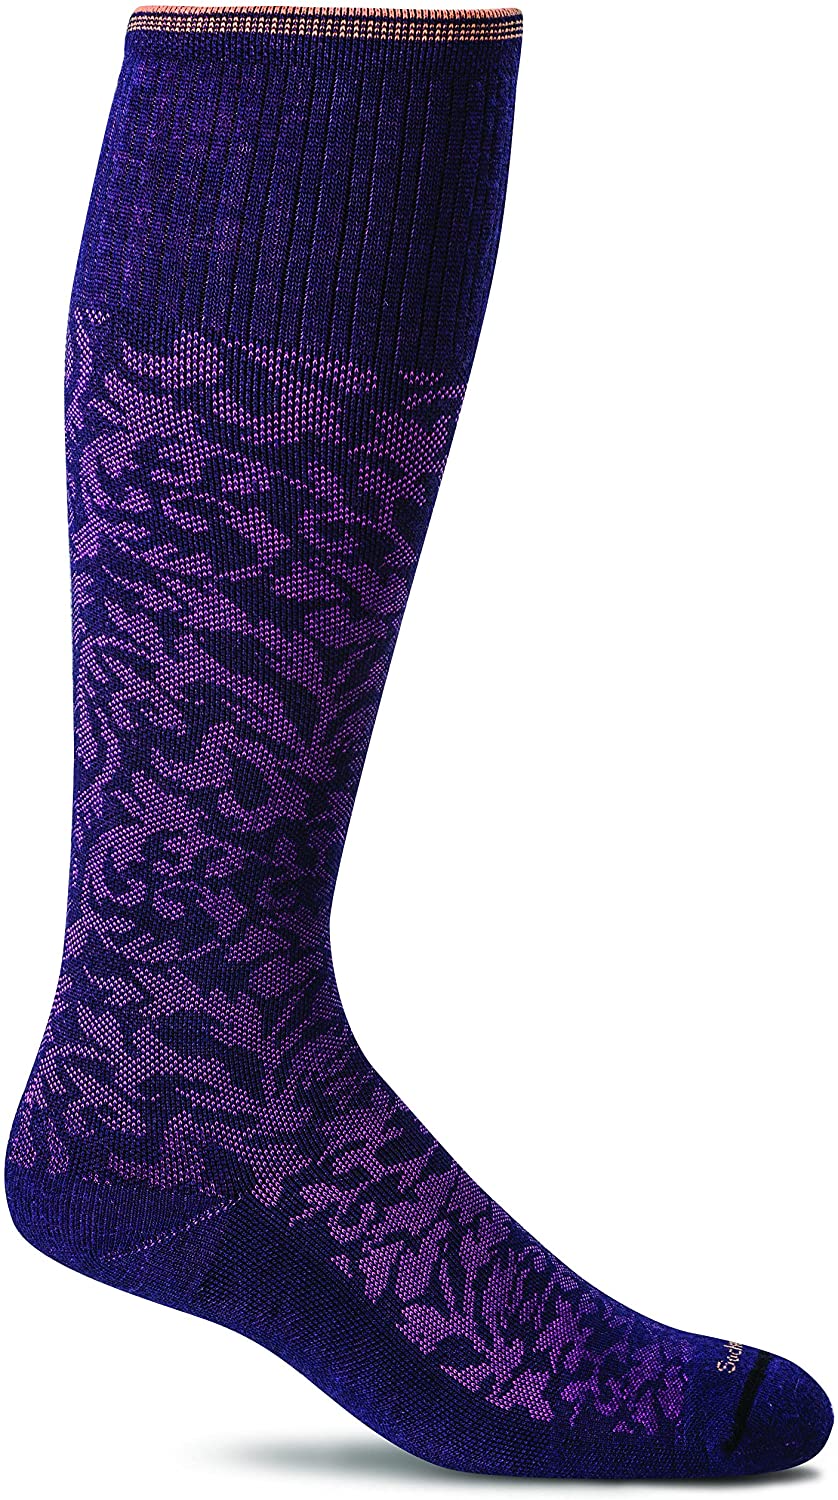 Sockwell Women's Damask Moderate Graduated Compression Sock in Concorde from the side